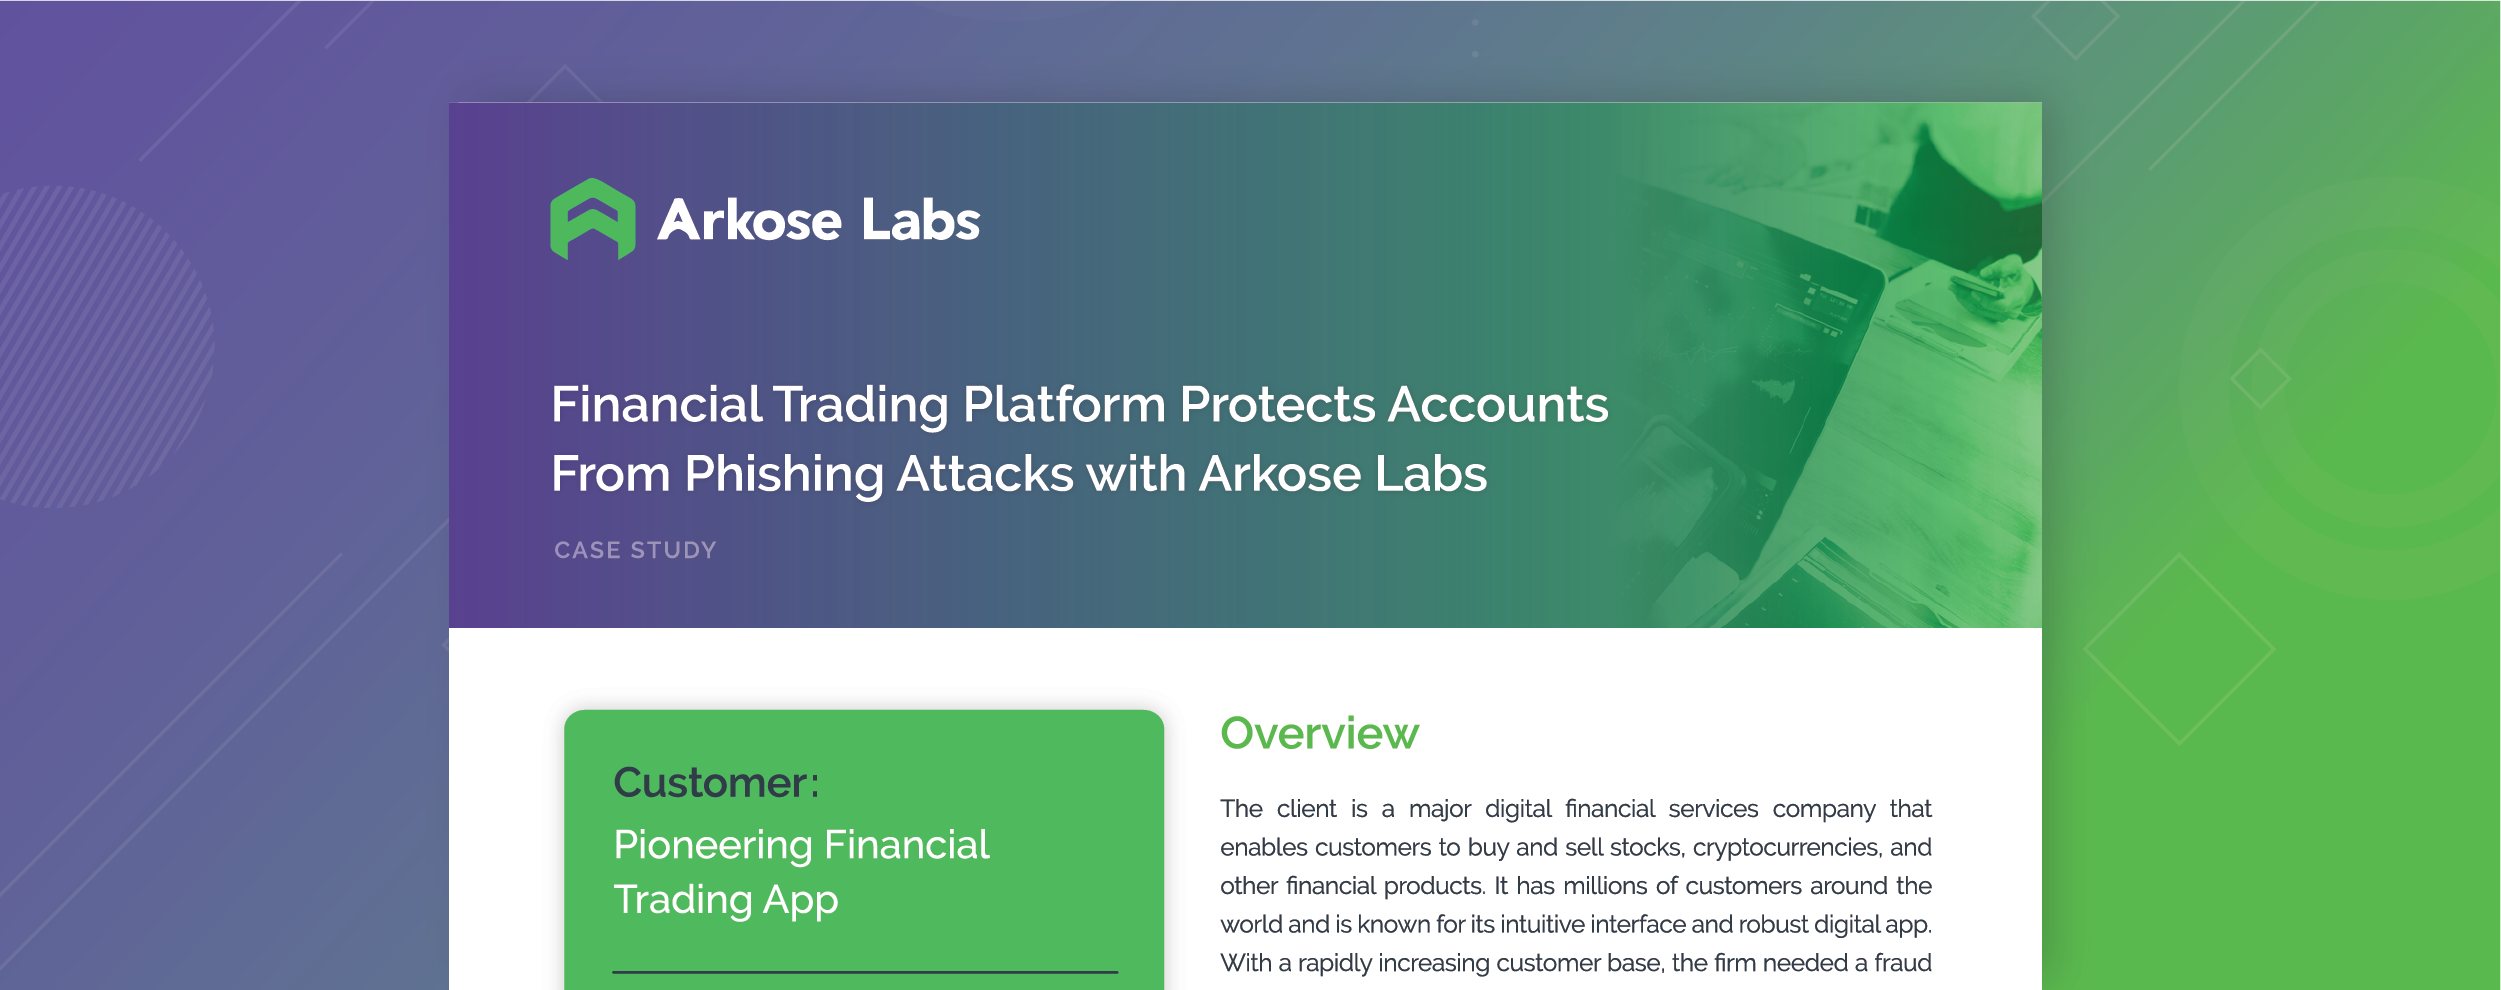 Financial Trading Platform Protects Accounts From Phishing Attacks with Arkose Labs case study